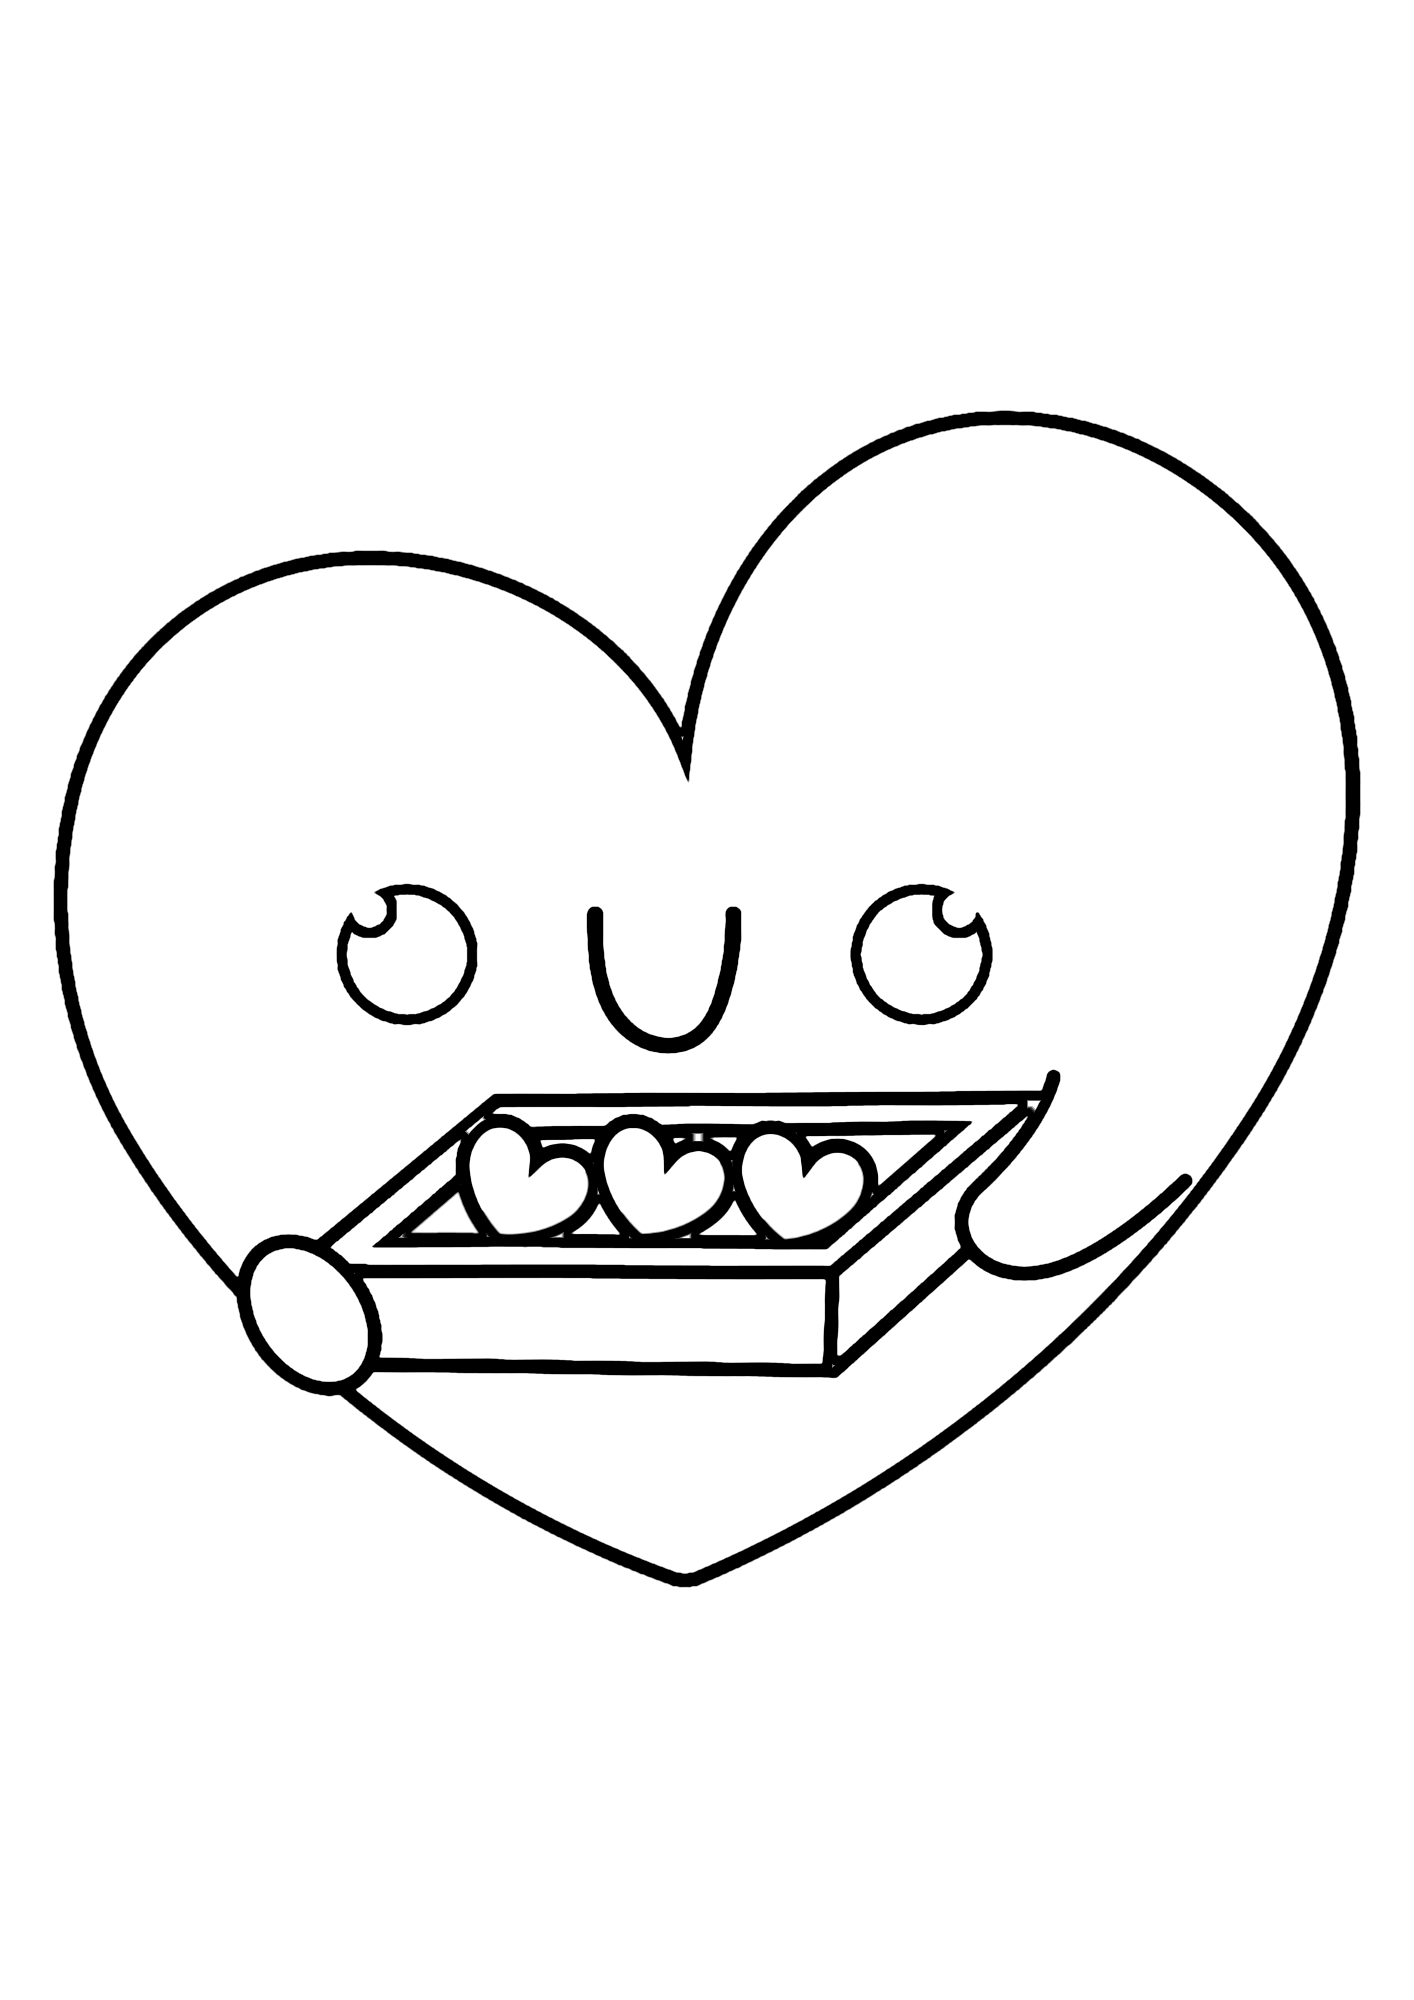 Valentine Heart Cartoon Coloring Page